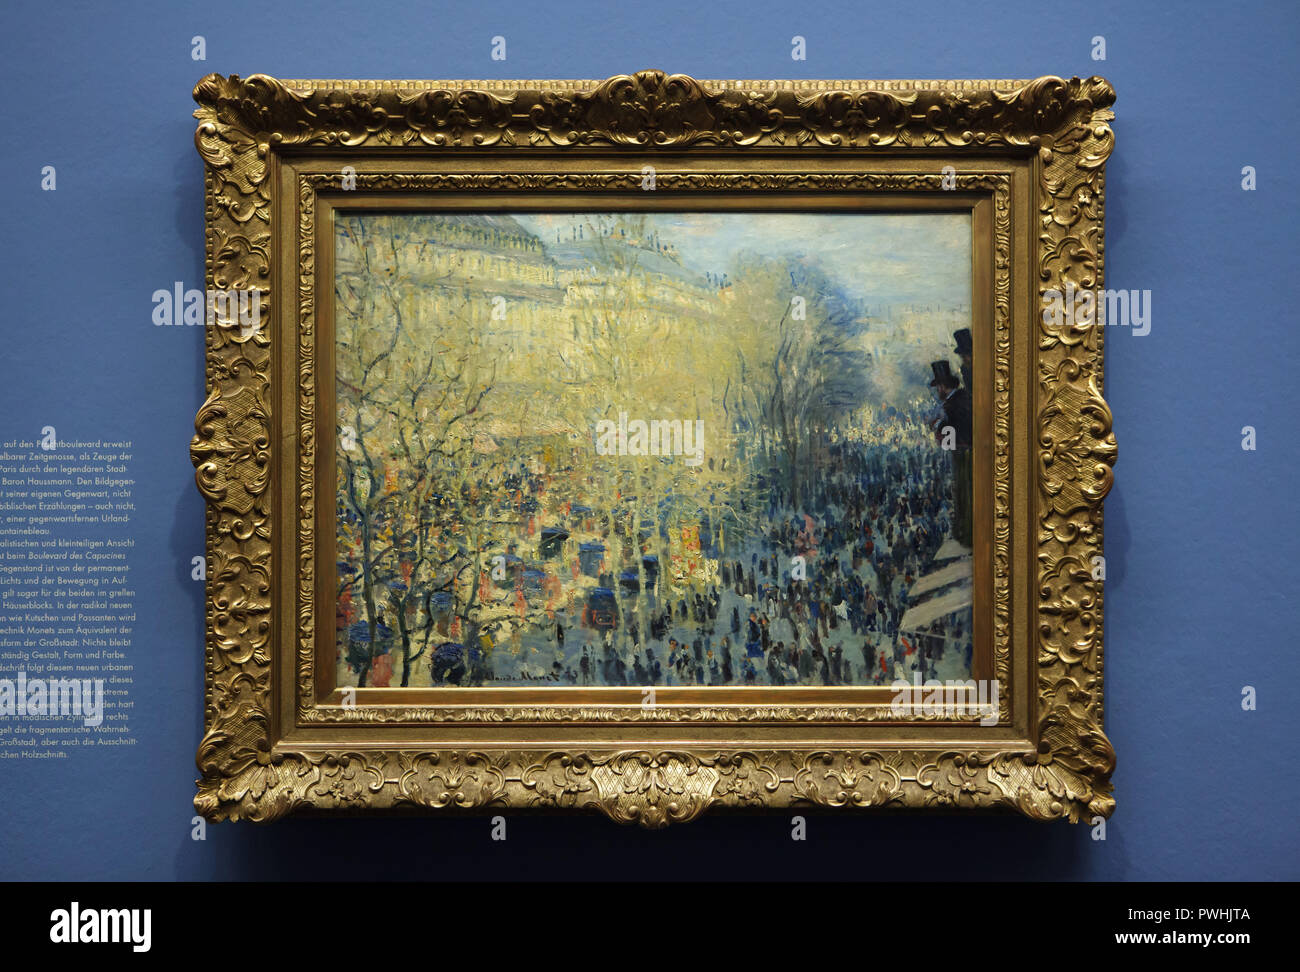 Painting 'Boulevard des Capucines' (1873) by French Impressionist painter Claude Monet on display at his retrospective exhibition in the Albertina Museum in Vienna, Austria. The exhibition devoted to the founder of French Impressionist painting runs till 6 January 2019. Stock Photo